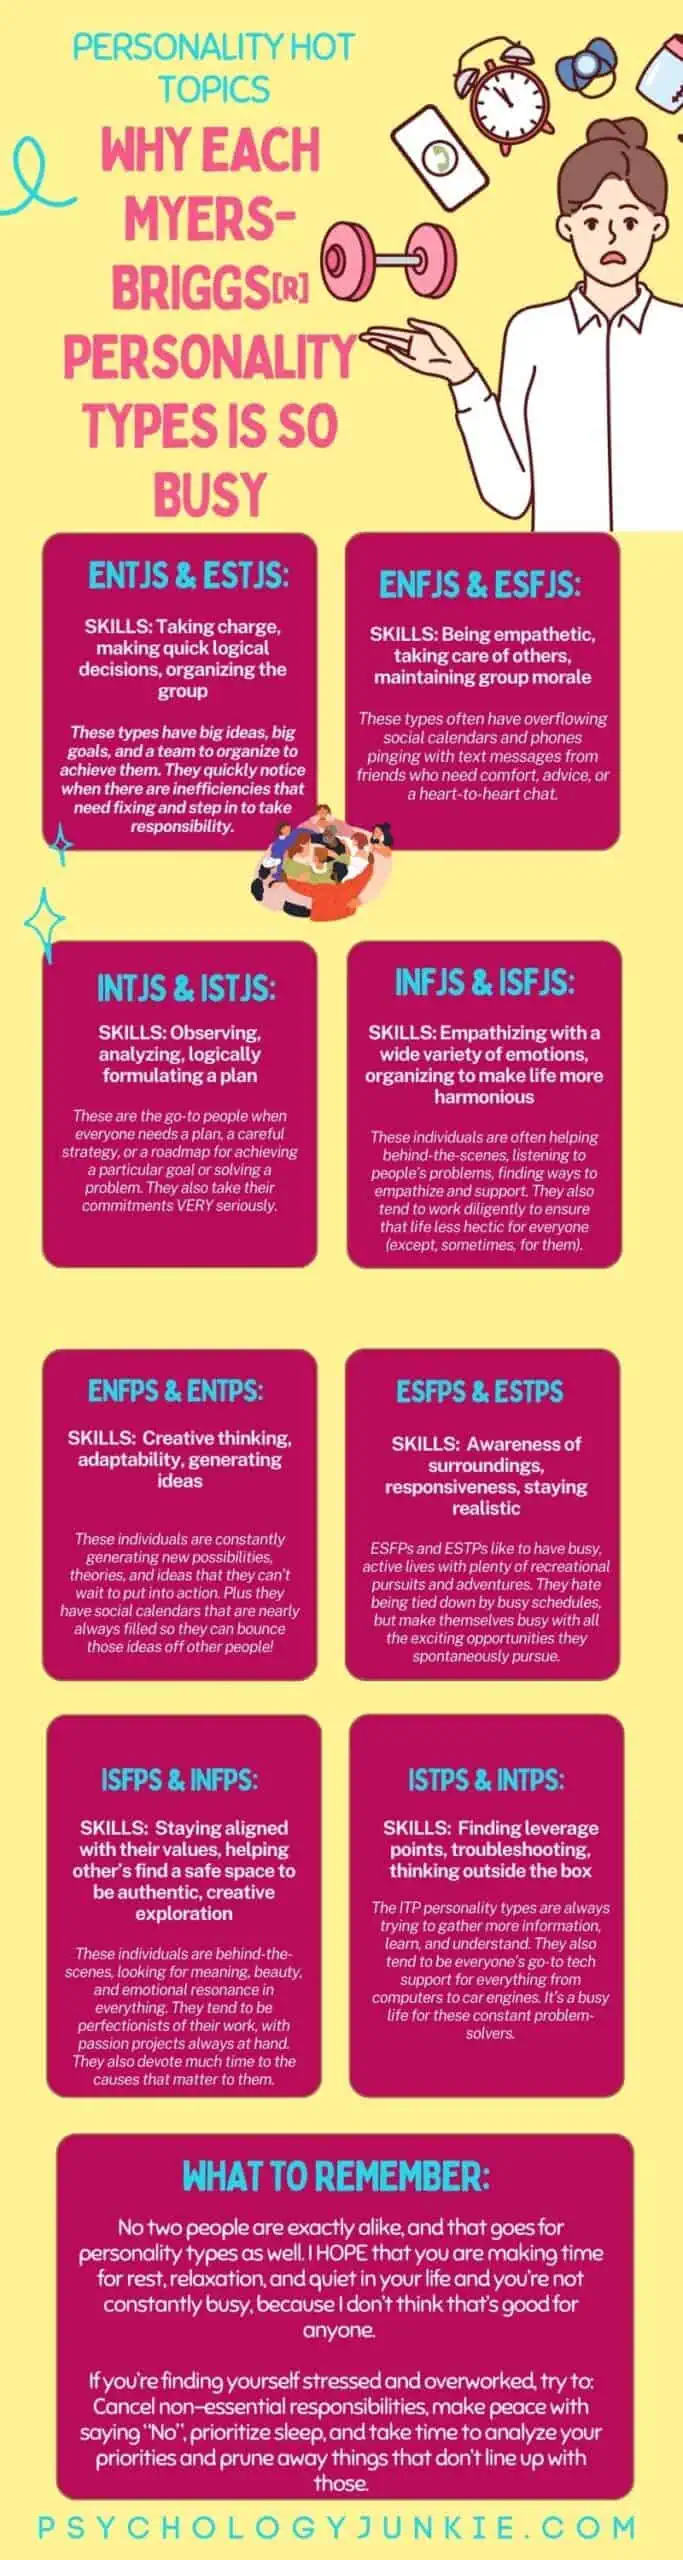 Why the 16 MBTI types are always so busy! #MBTI #Personality